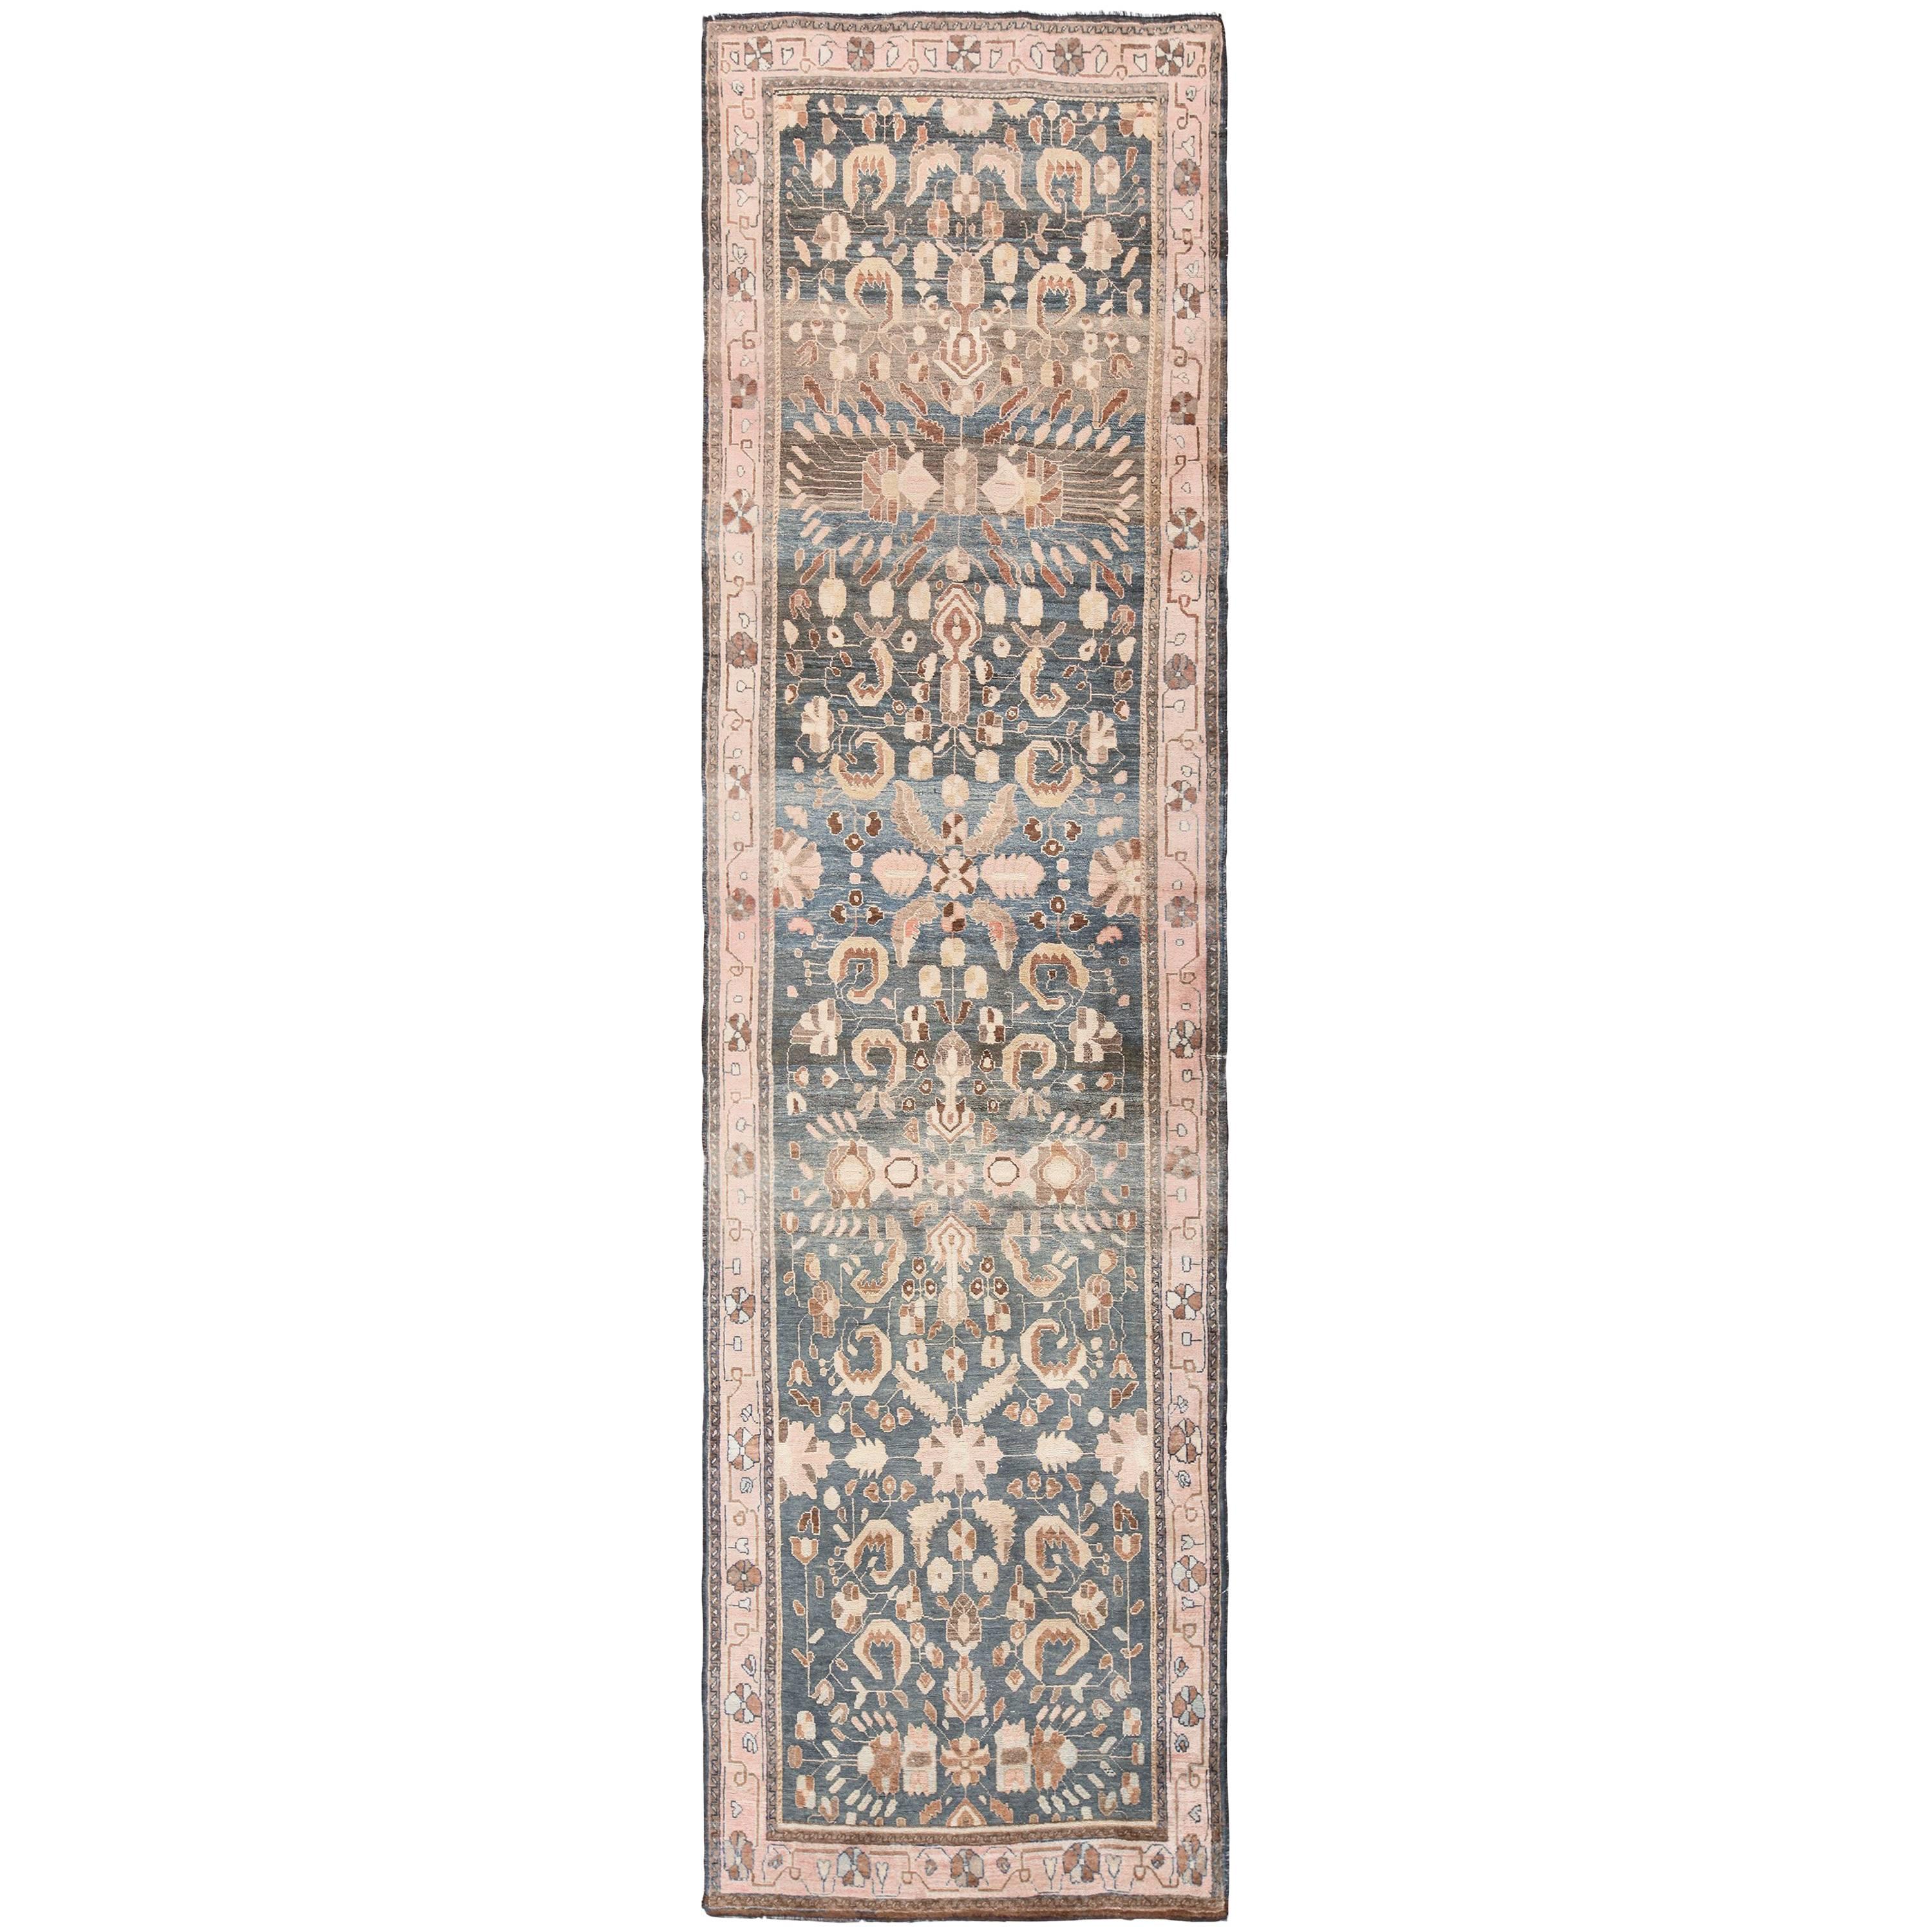 Antique Khorassan Persian Runner Rug. Size: 3 ft 6 in x 12 ft 10 in 